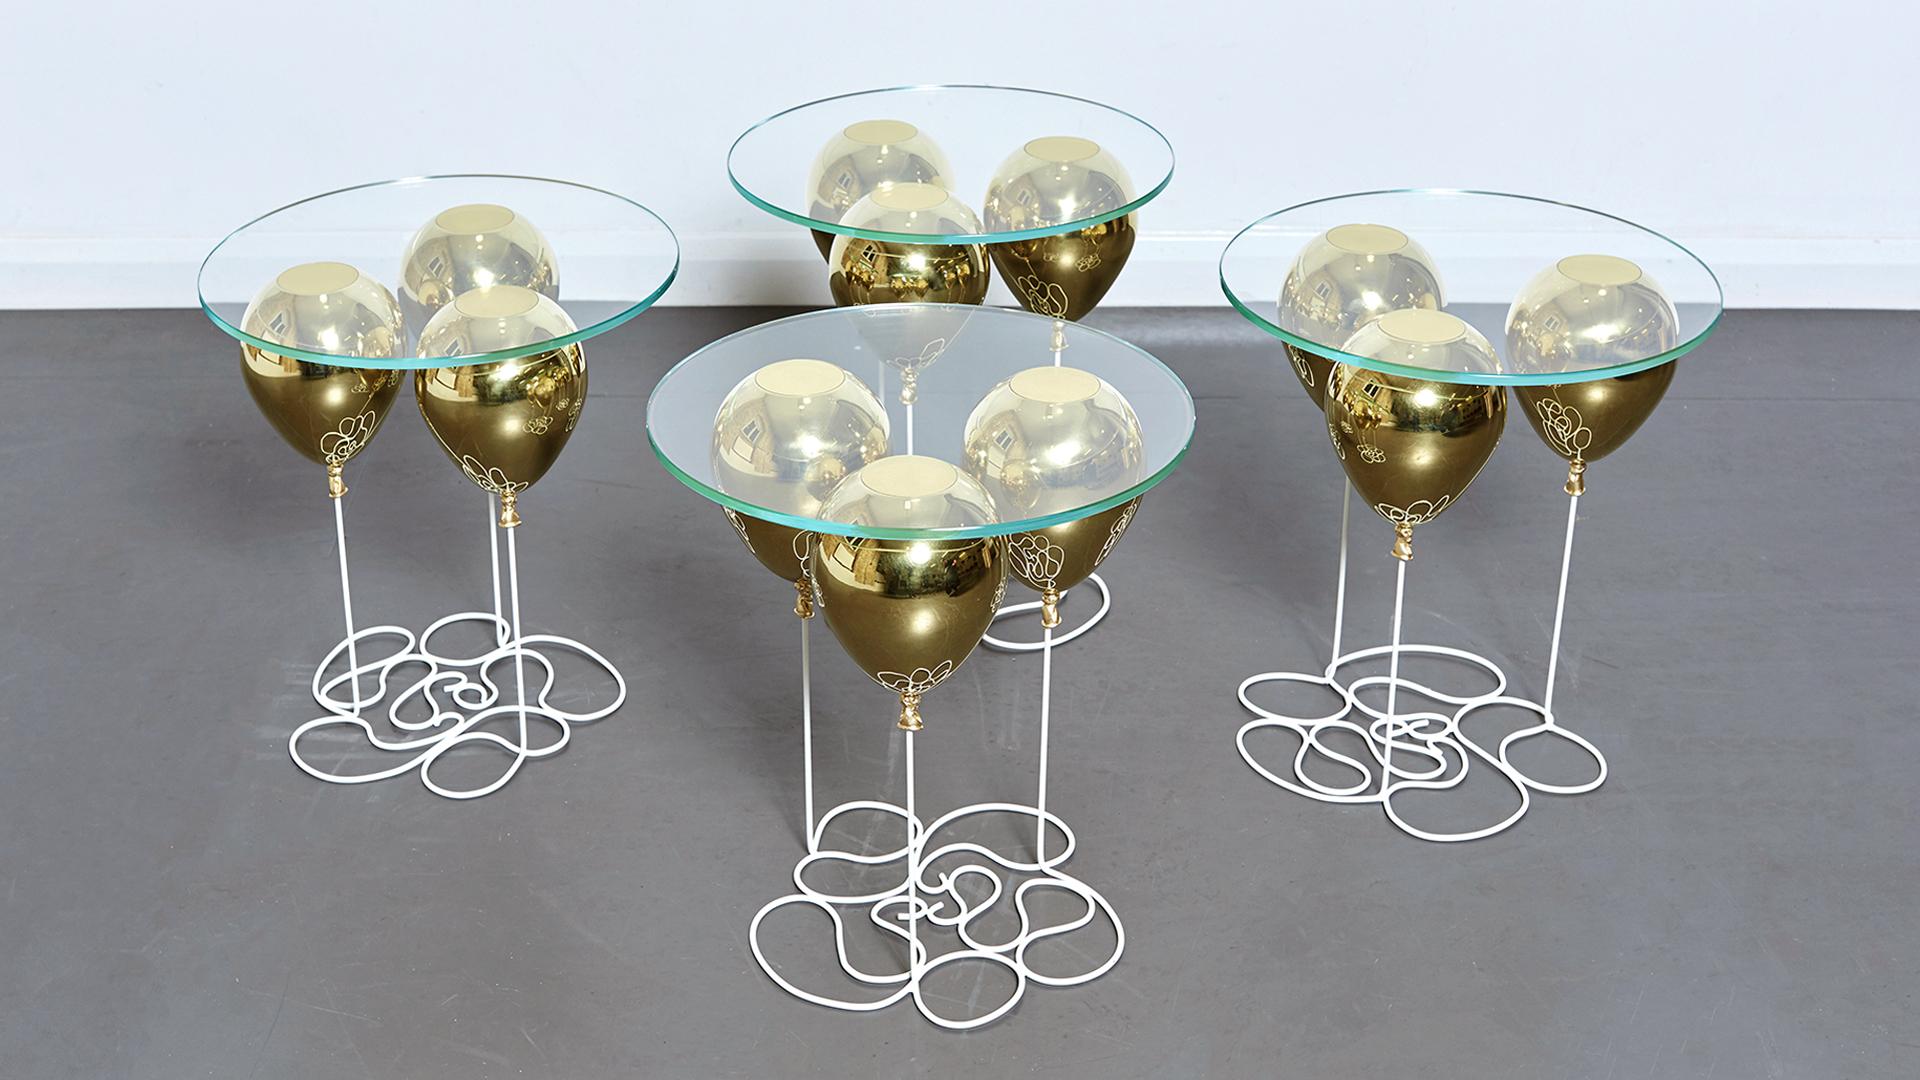 The UP Balloon Side Table is a playful trompe l’oeil with gold and silver balloons impressing the illusion of a levitating glass tabletop. 

An uplifting design from Chris Duffy that captures the imagination, playing on the concepts of levitation